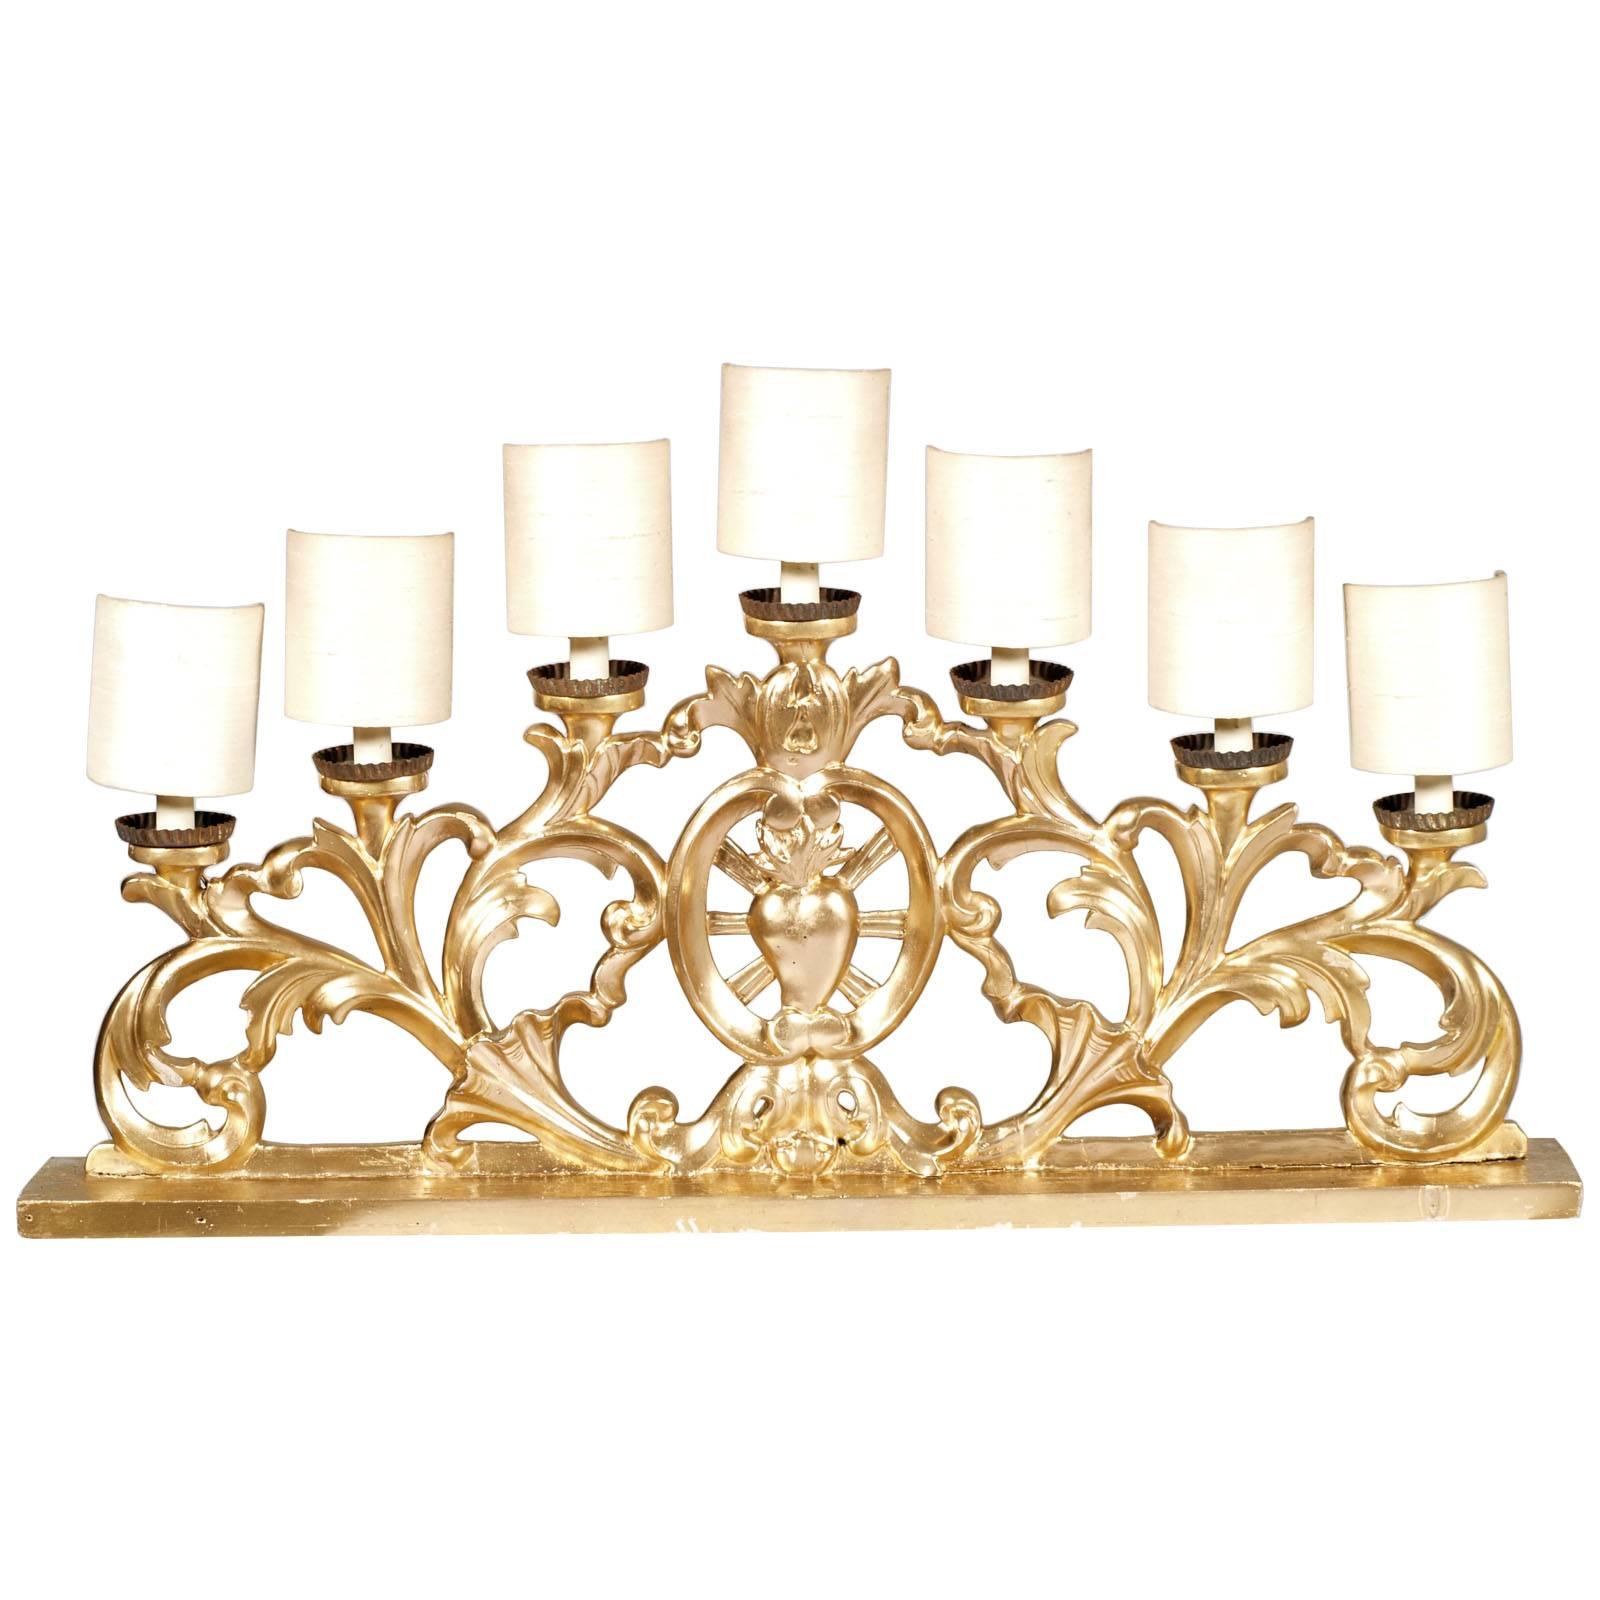 Venetian Baroque seven lights candelabra, indicated for fireplace or credenza, in hand-carved walnut, gold leaf finish, proceeds from a candle holders of early 1700s
The central heart carved, indicates its ecclesiastical origin.

Measures cm: H 56 x